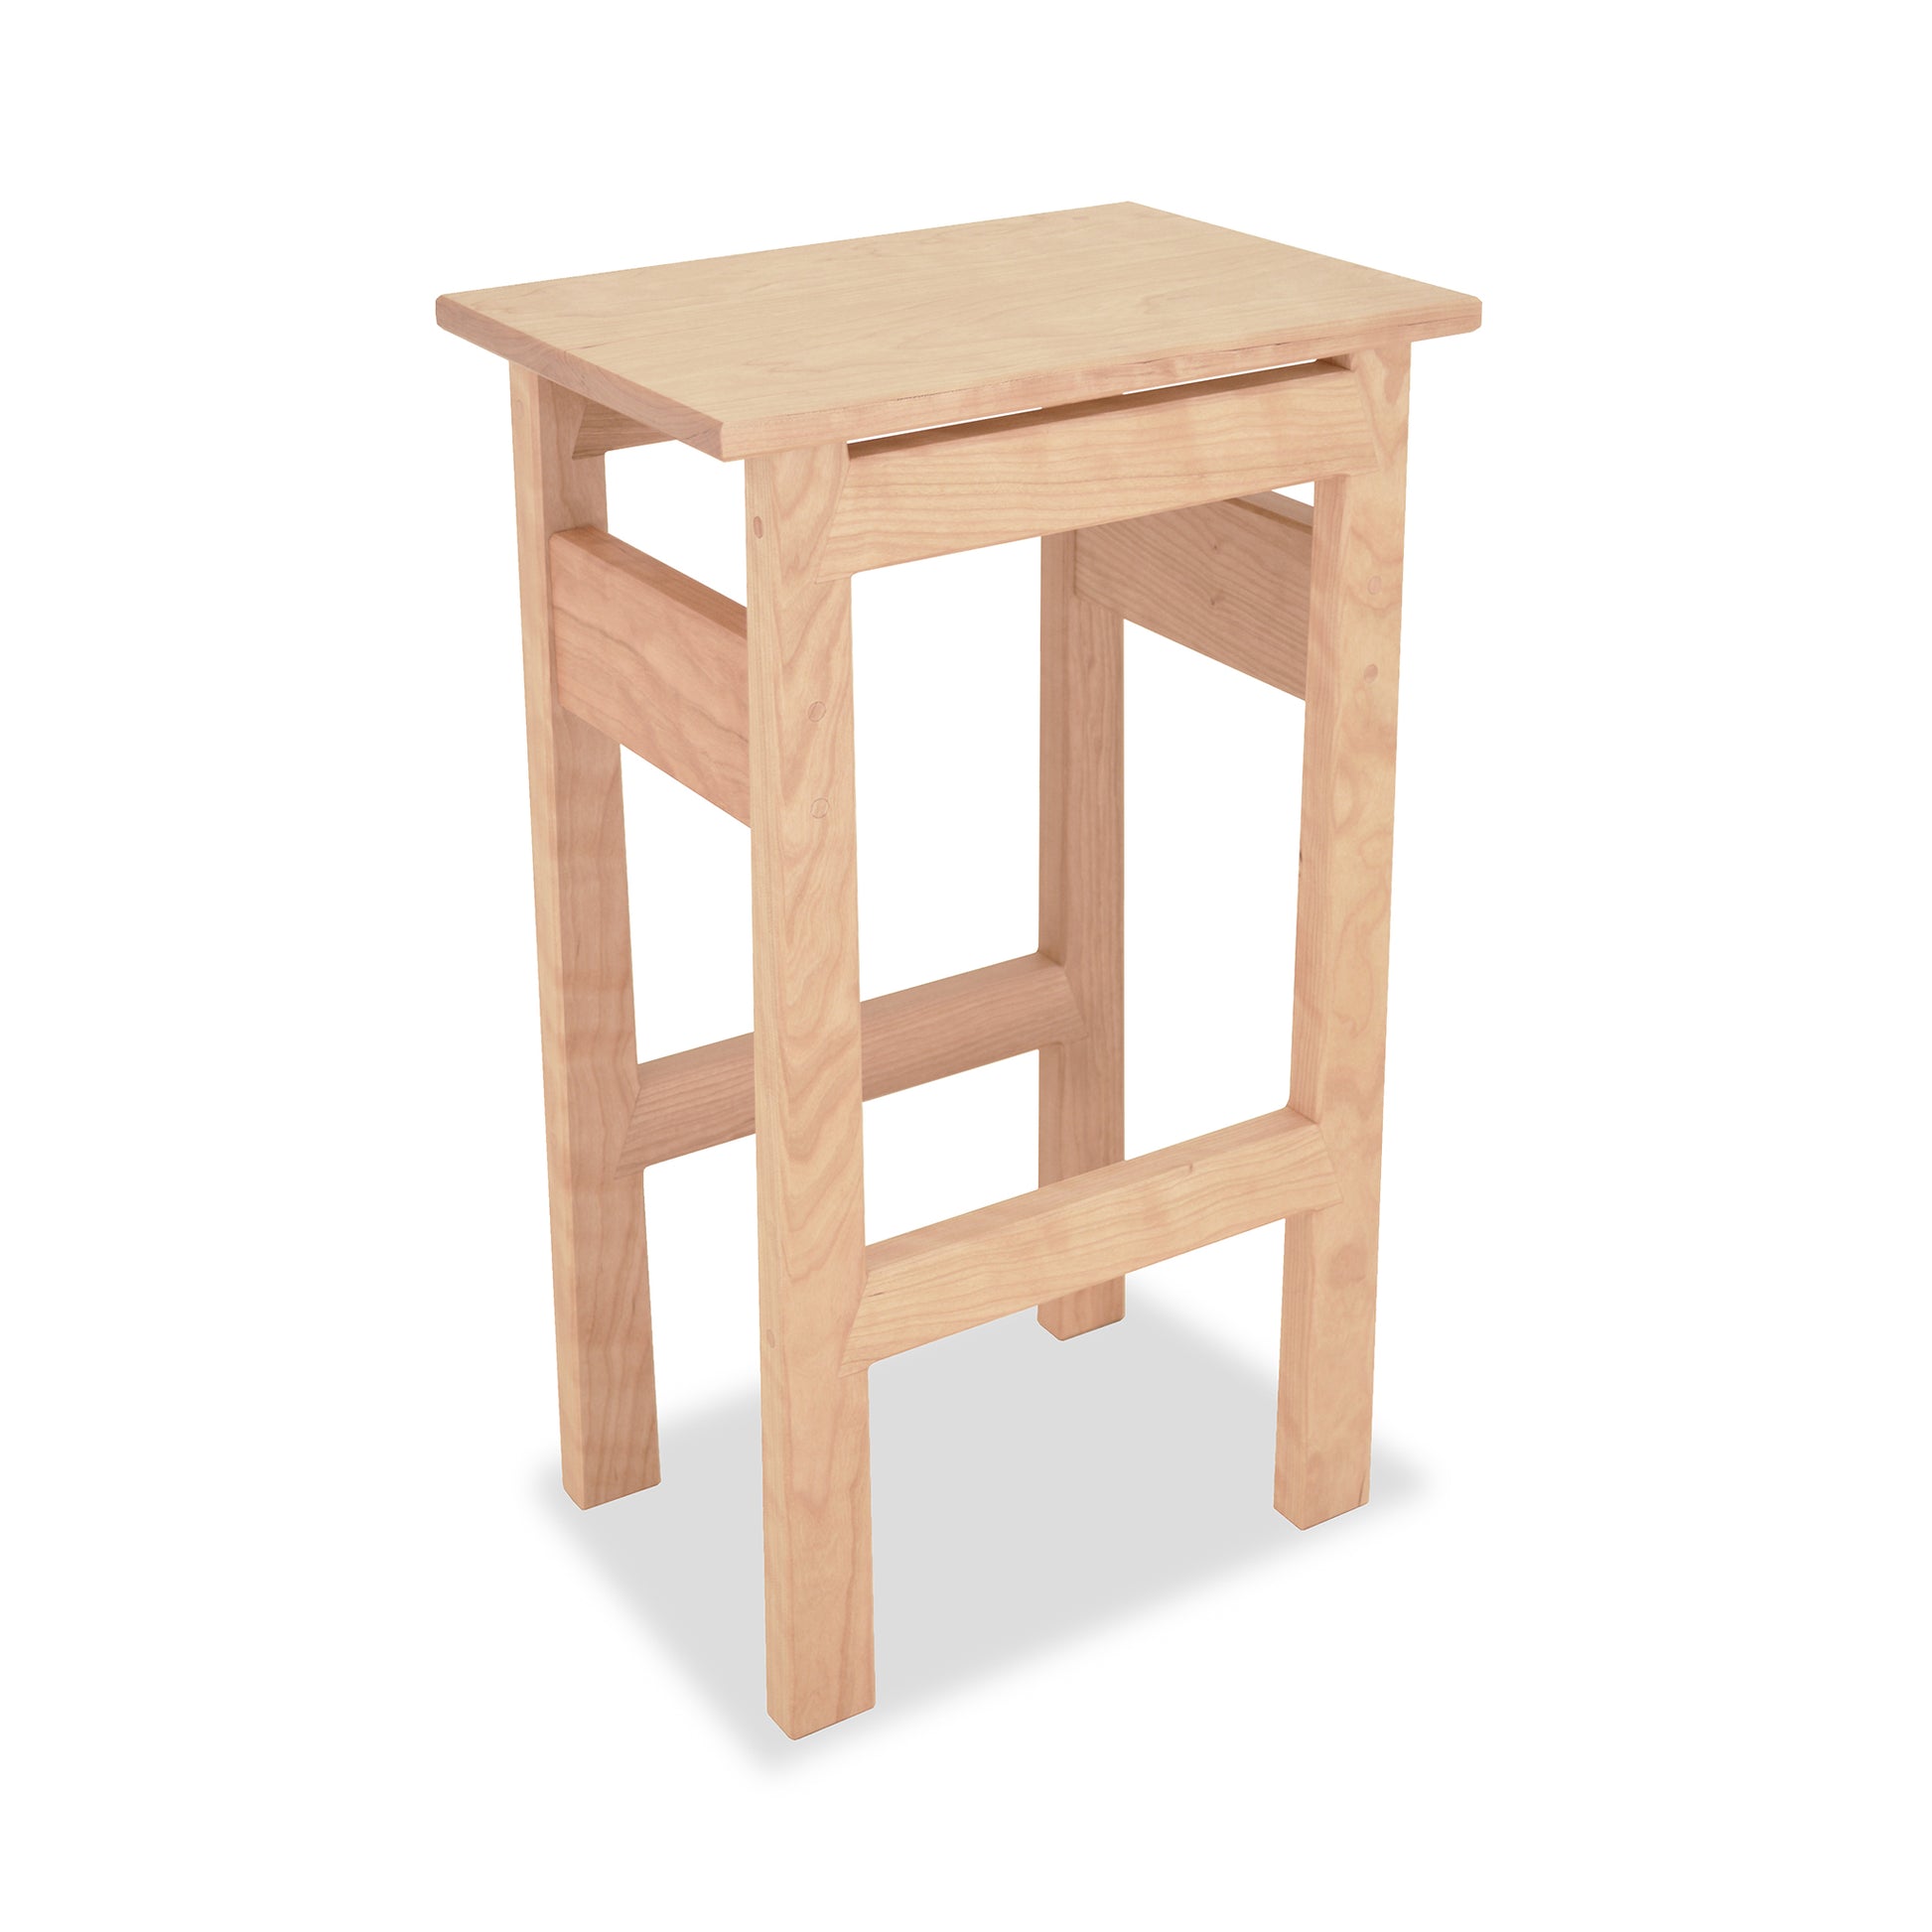 A Contemporary Asian Stool by Maple Corner Woodworks on a white background.